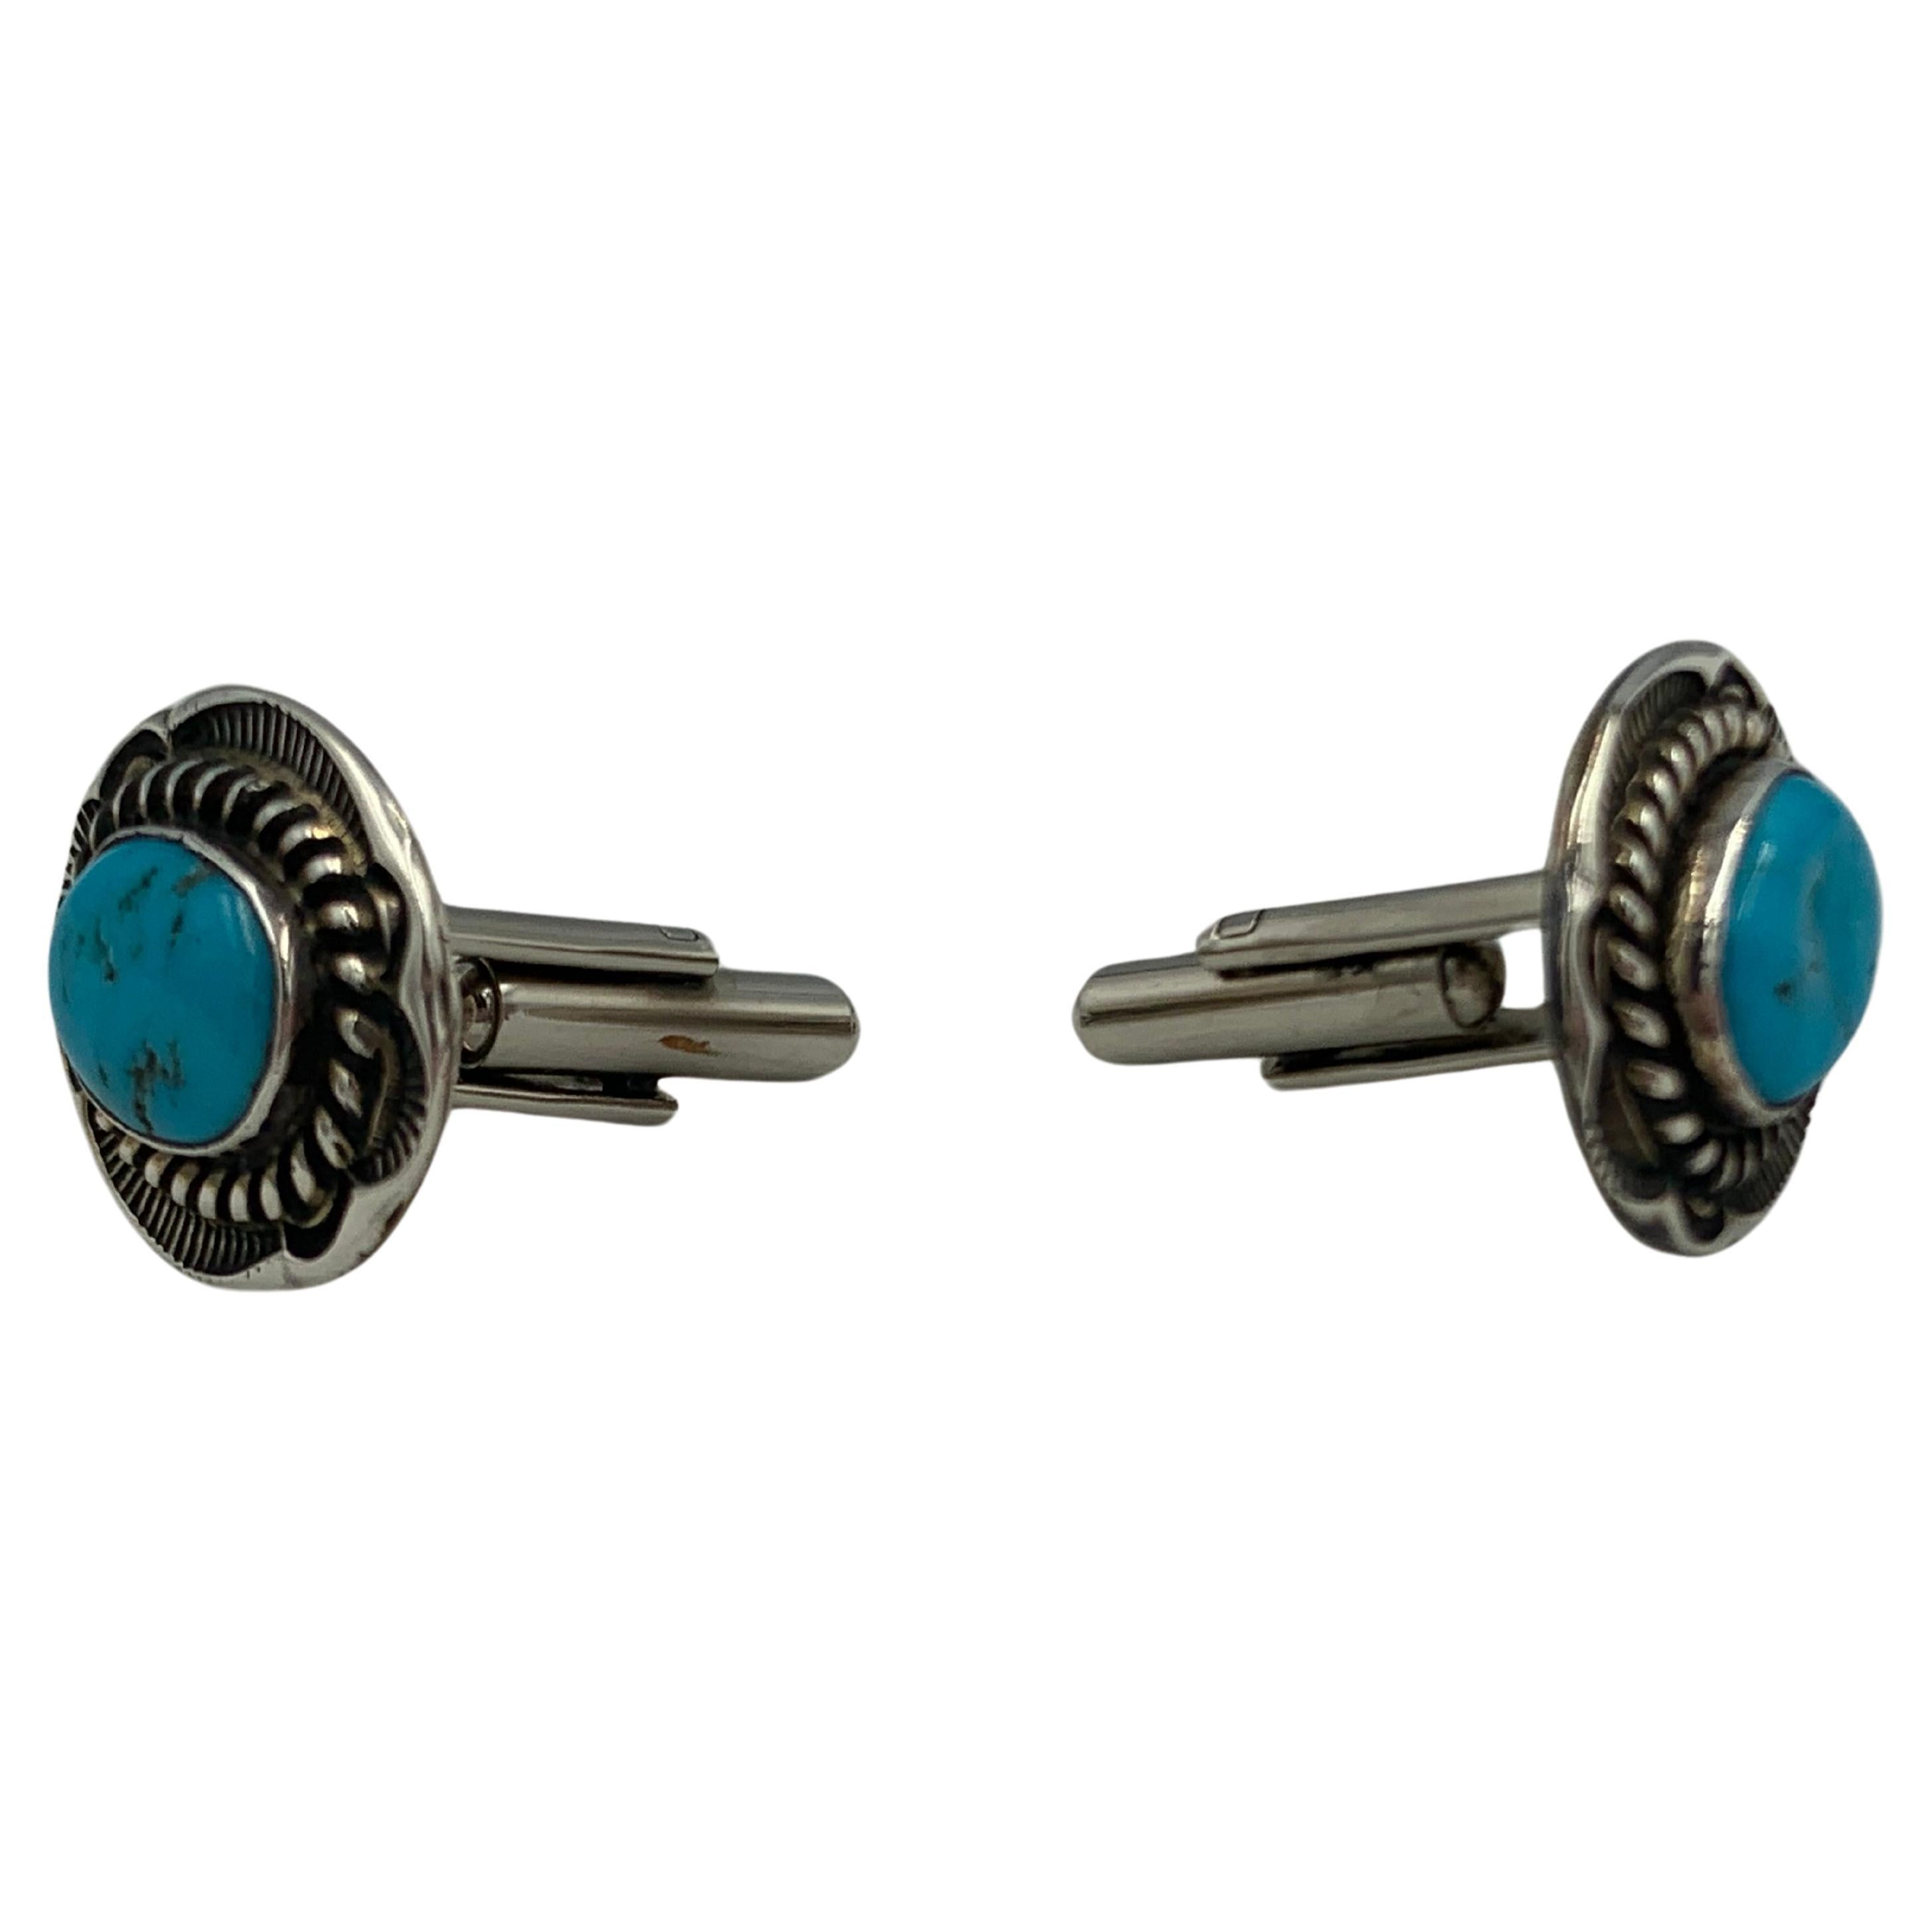 Native American Cuff Links with Kingman Turquoise Gemstone by Dan Oliver